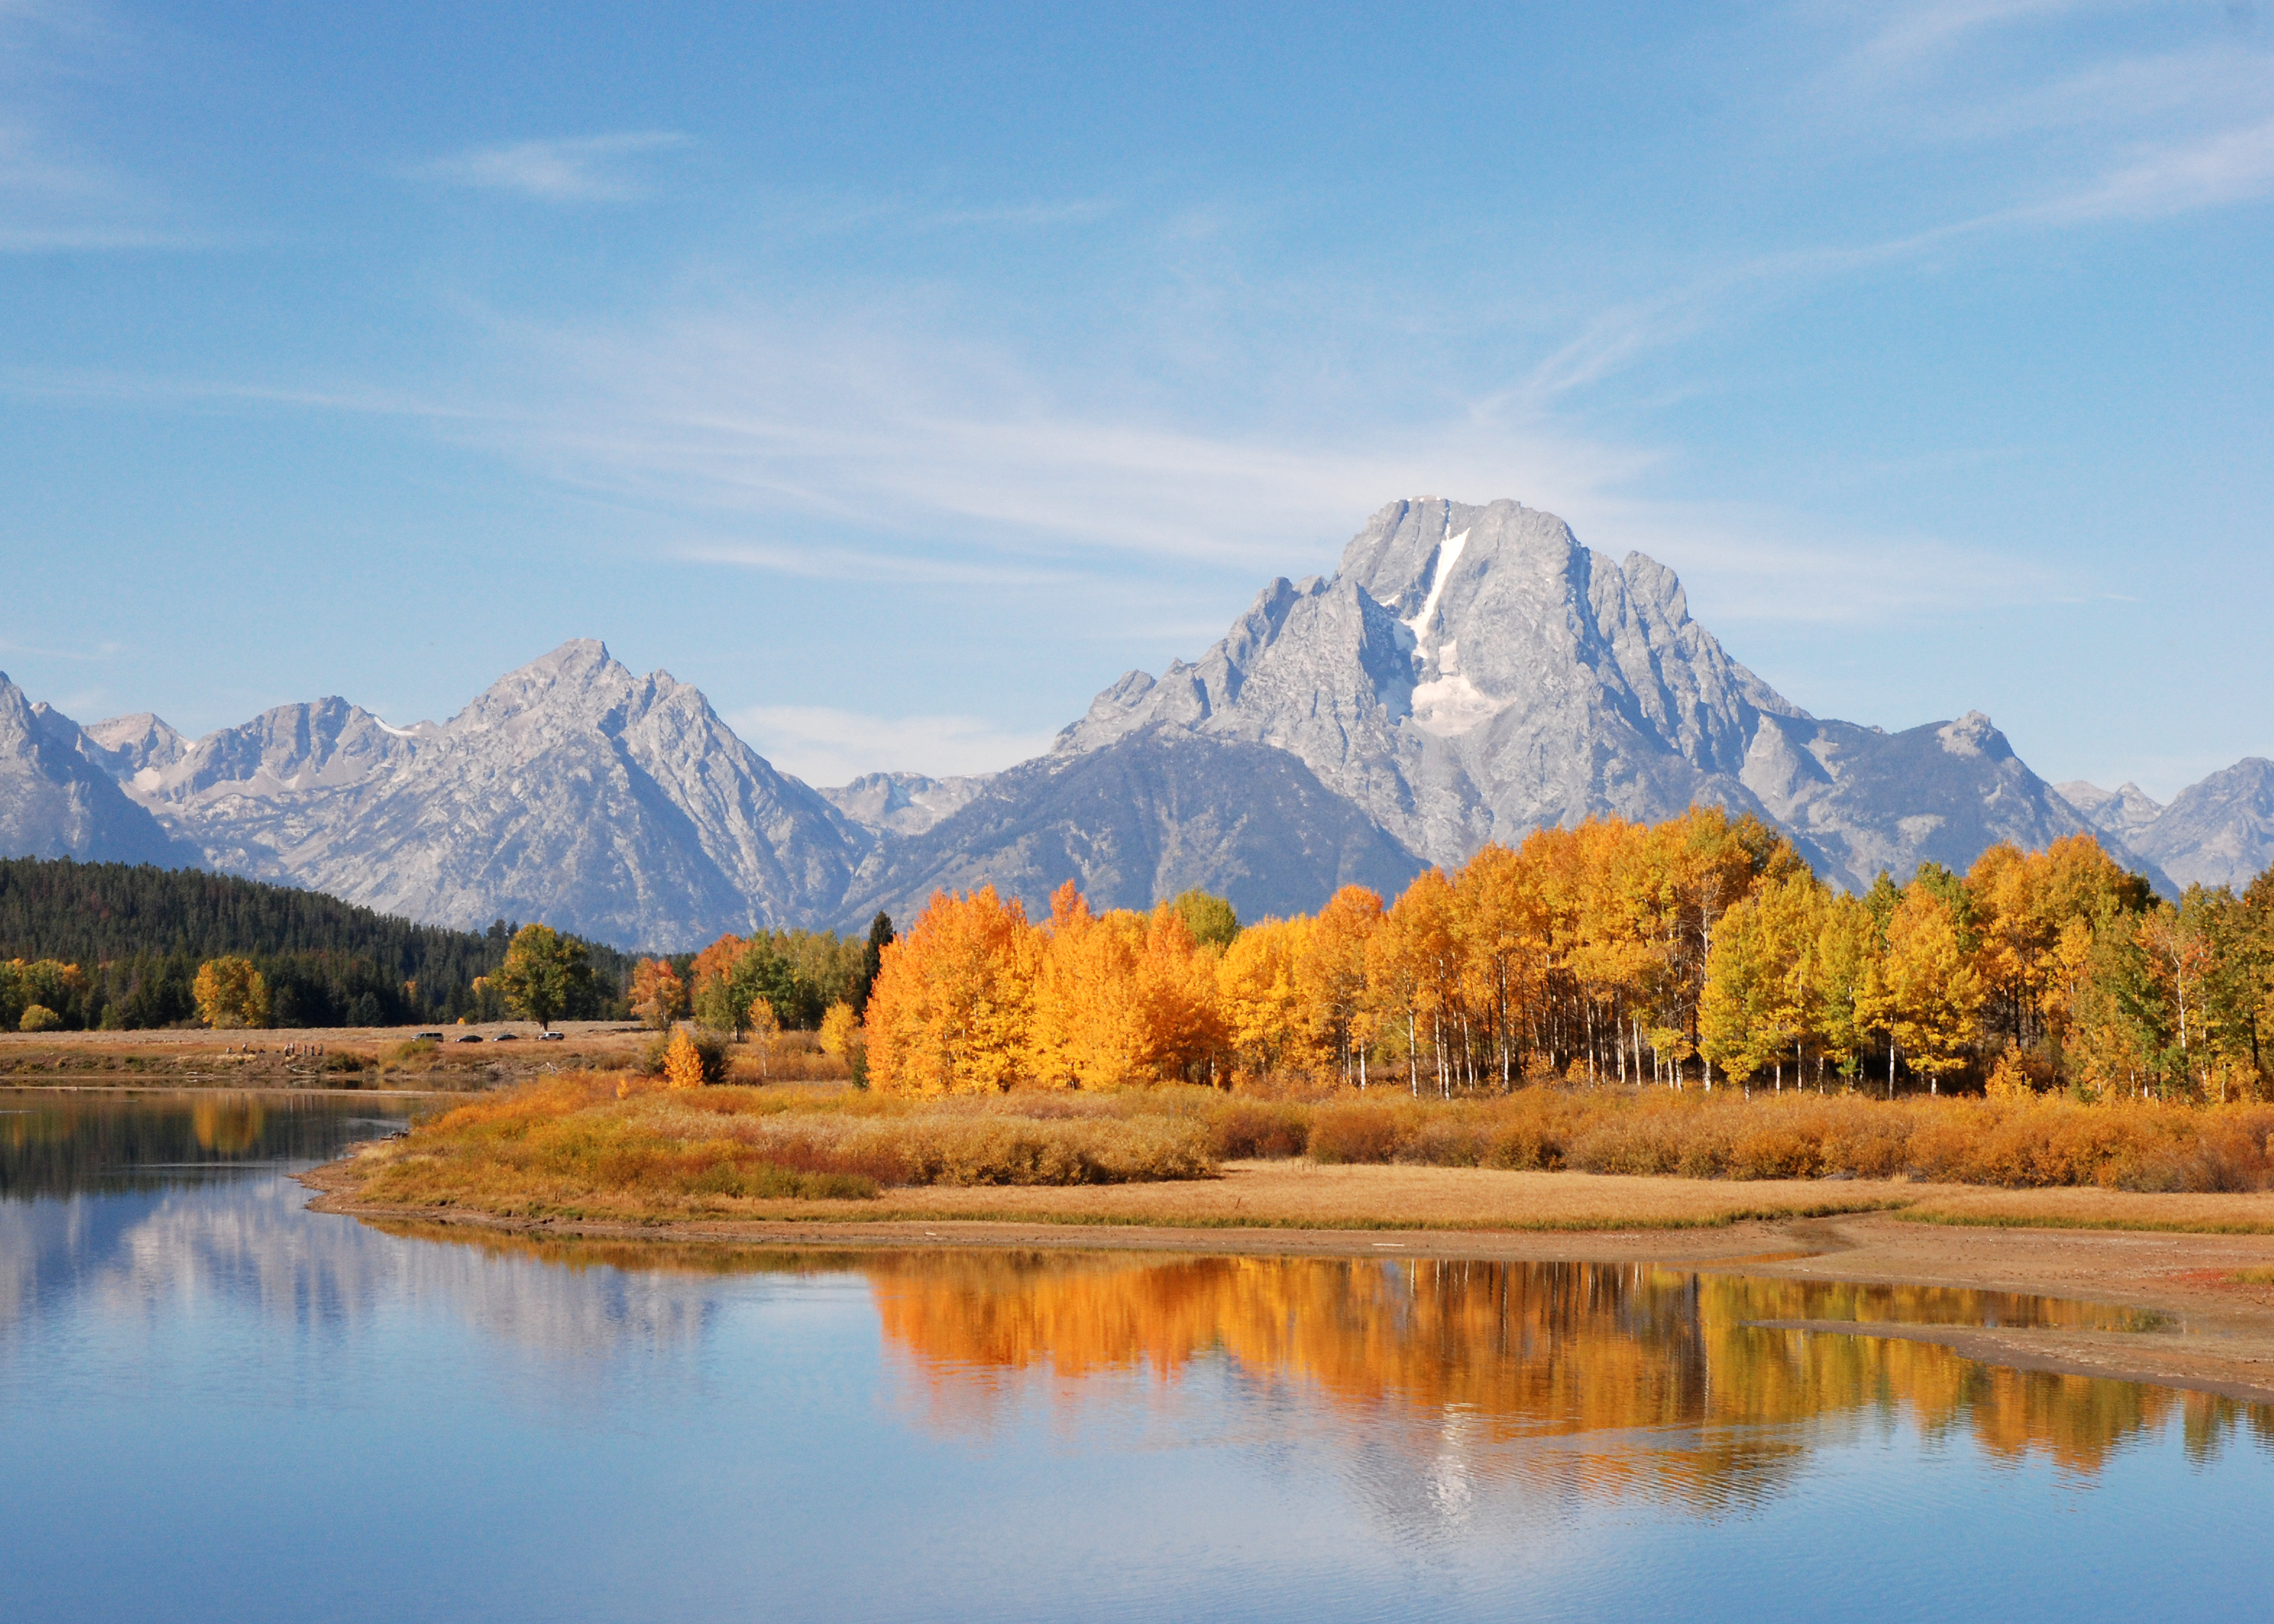 Oxbow Bend on the Snake River during fall with golden aspens and Mount Moran in the background.